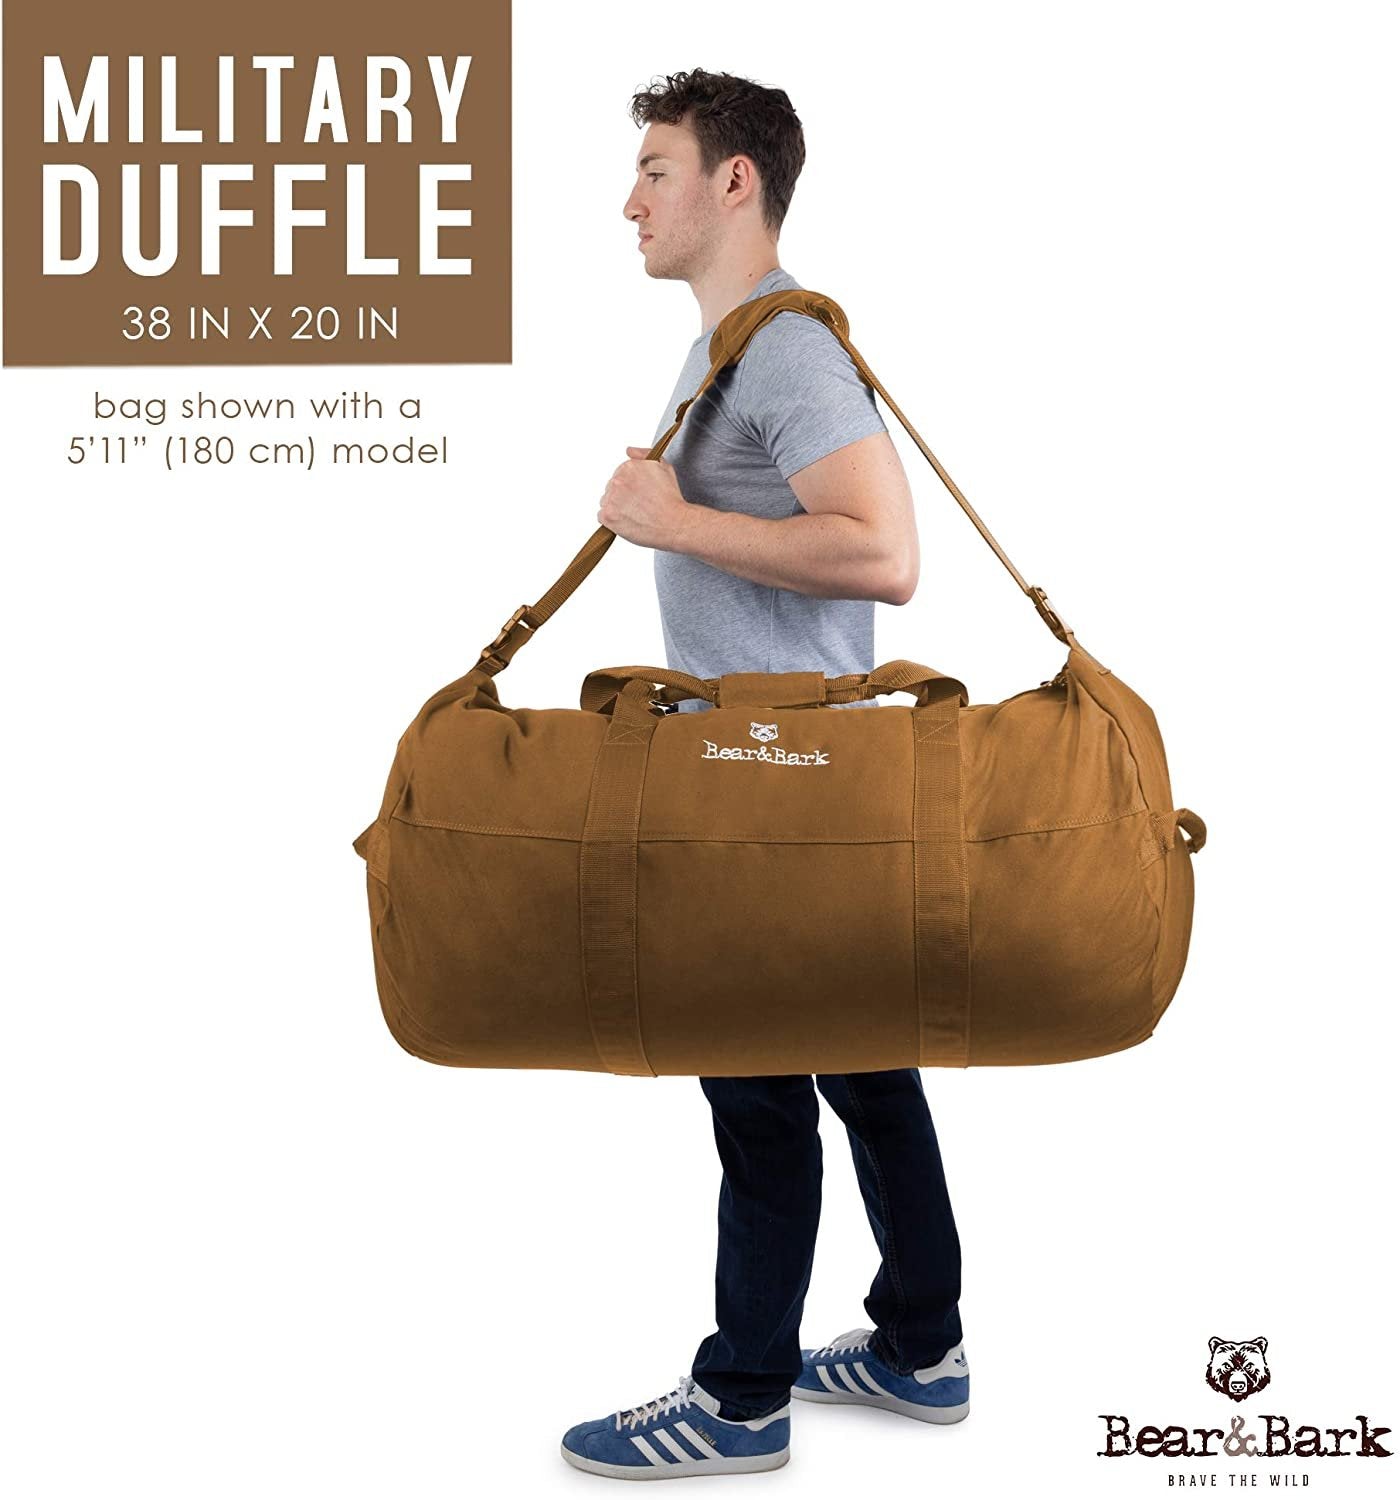 Very Large Duffle Bag – Desert Brown 38”x20” - 195.6L - Canvas Military and Army Cargo Style Duffel Tote for Men and Women– College Student, Gym, Backpacking, Travel Luggage and Storage Shoulder Bag